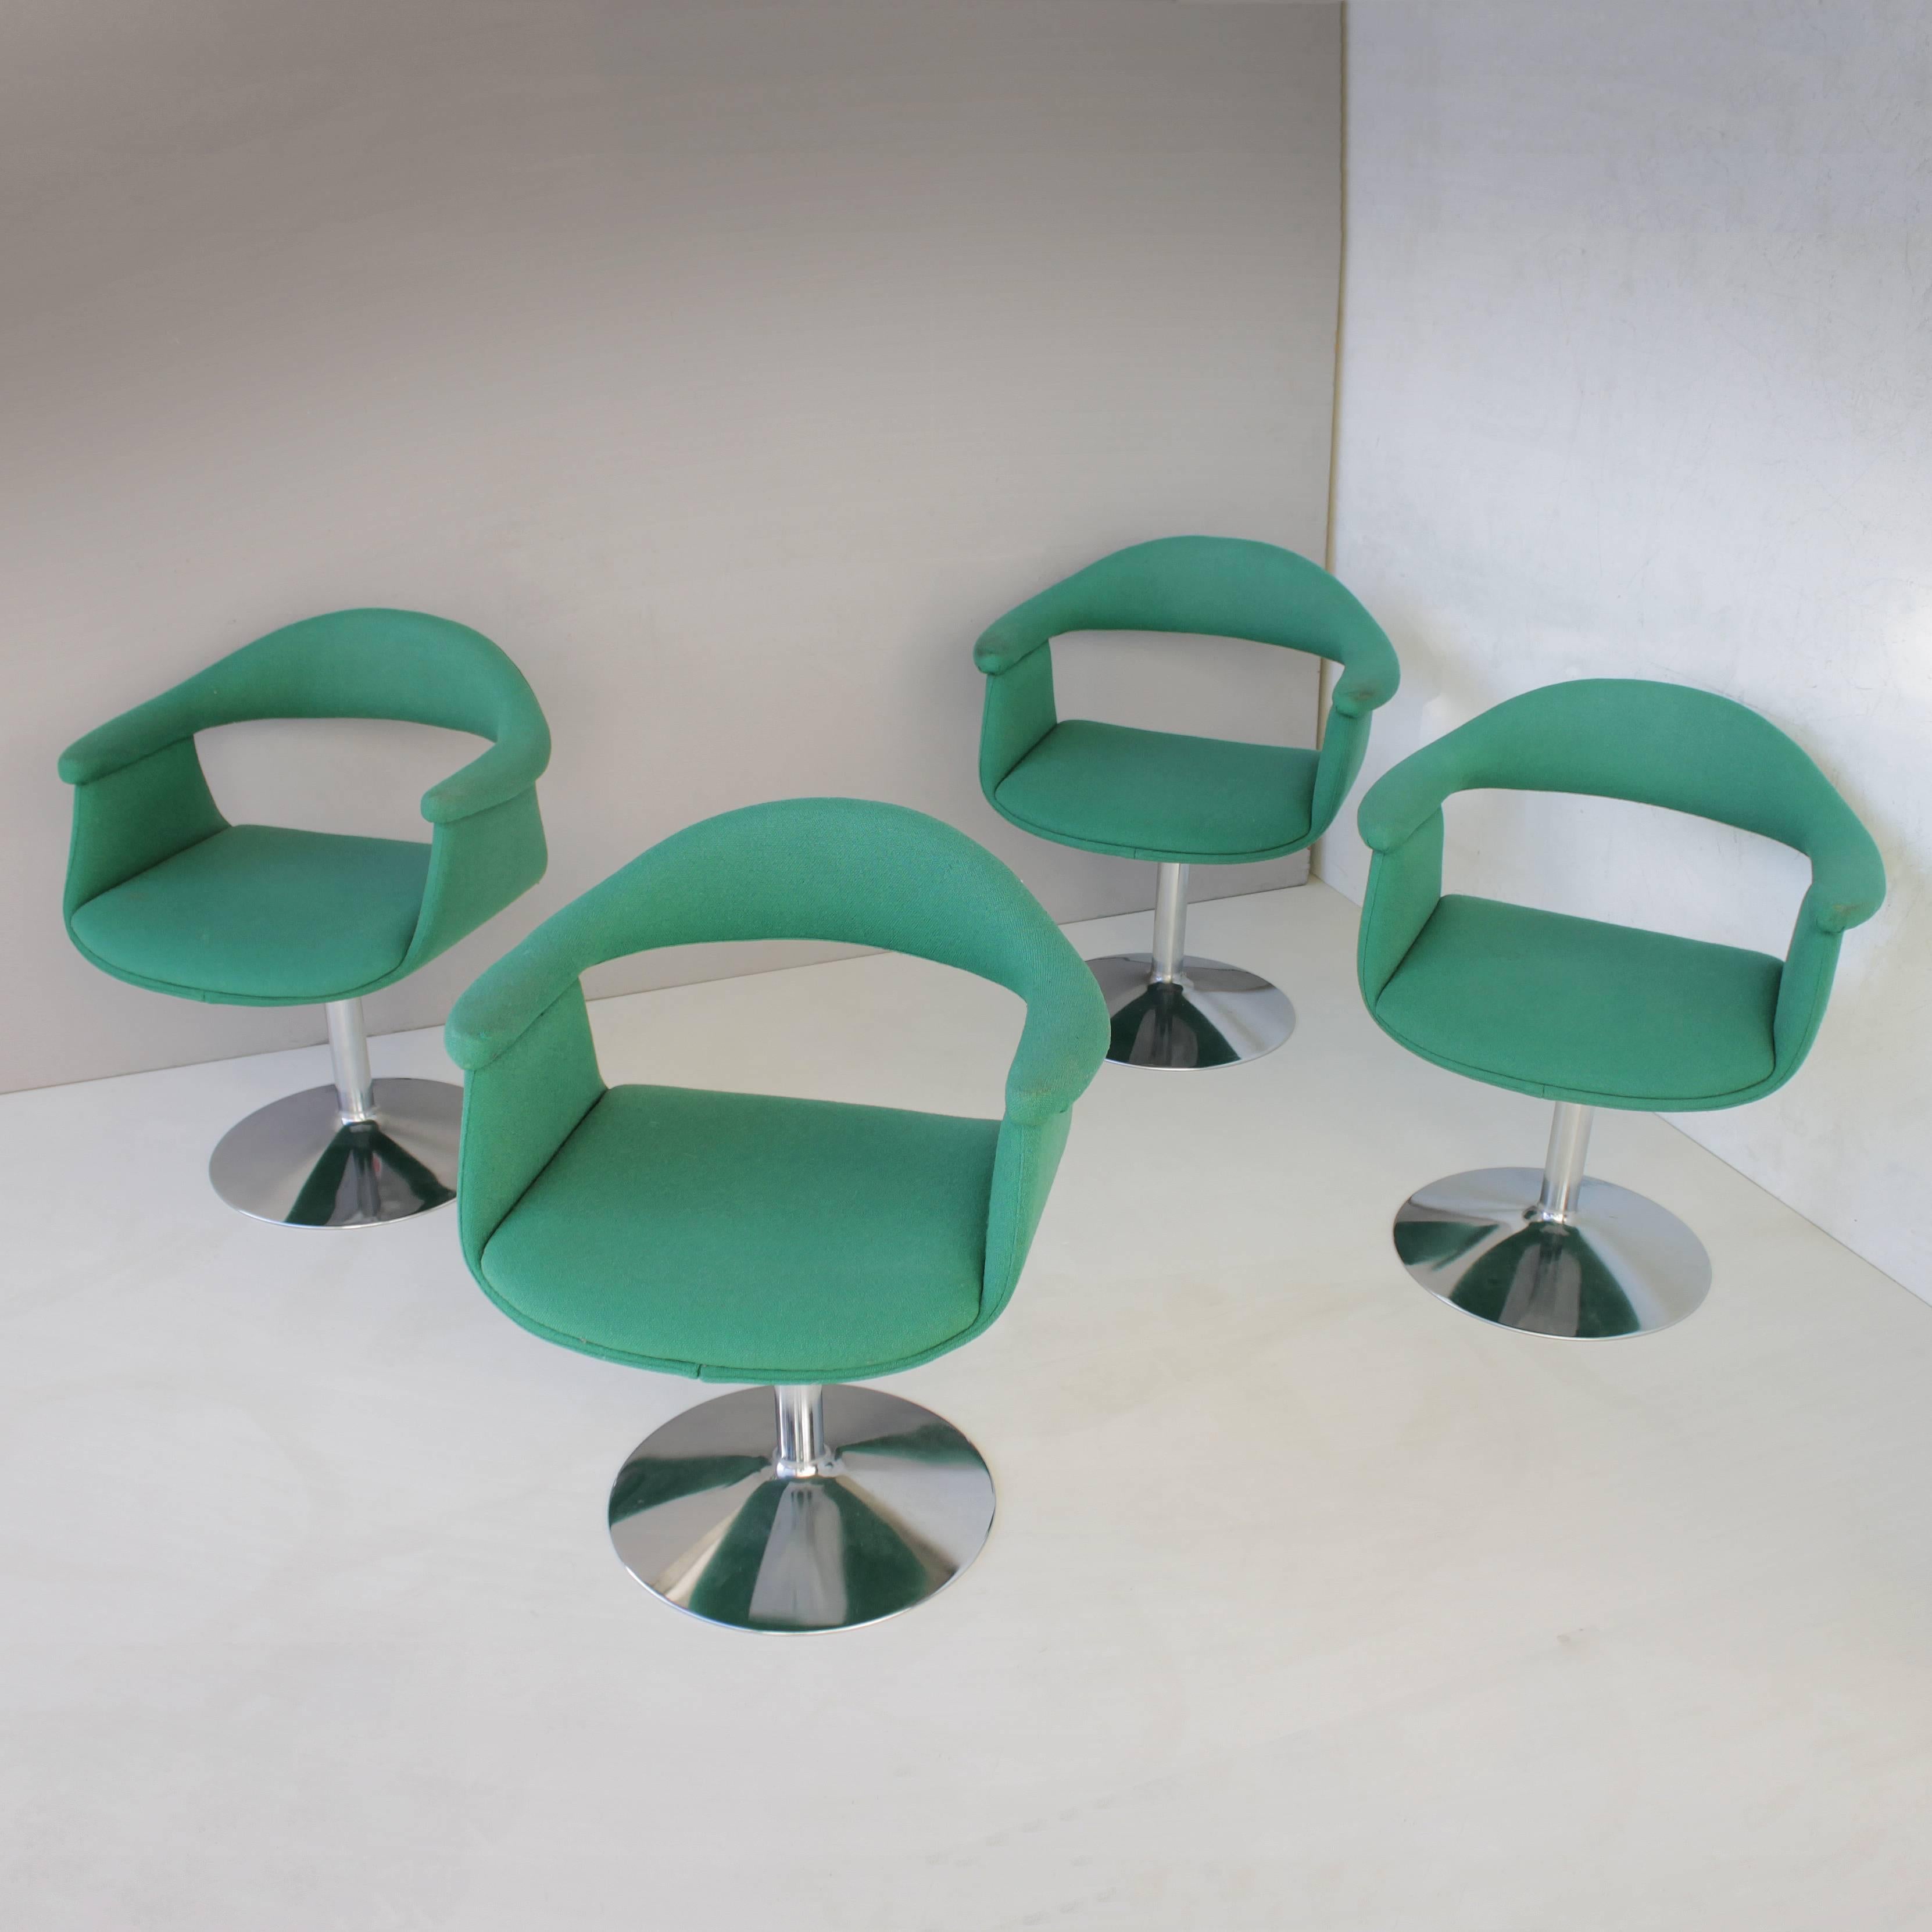 A very rare set of six (6) swivel chairs by Eero Aarnio for Asko Lahti Finland. Model: Forelli 8565 (1966), also known as Captain's chairs. Chromed metal swivel base and sea green woolen upholstery. The upholstery is a bit worn out at the end of the